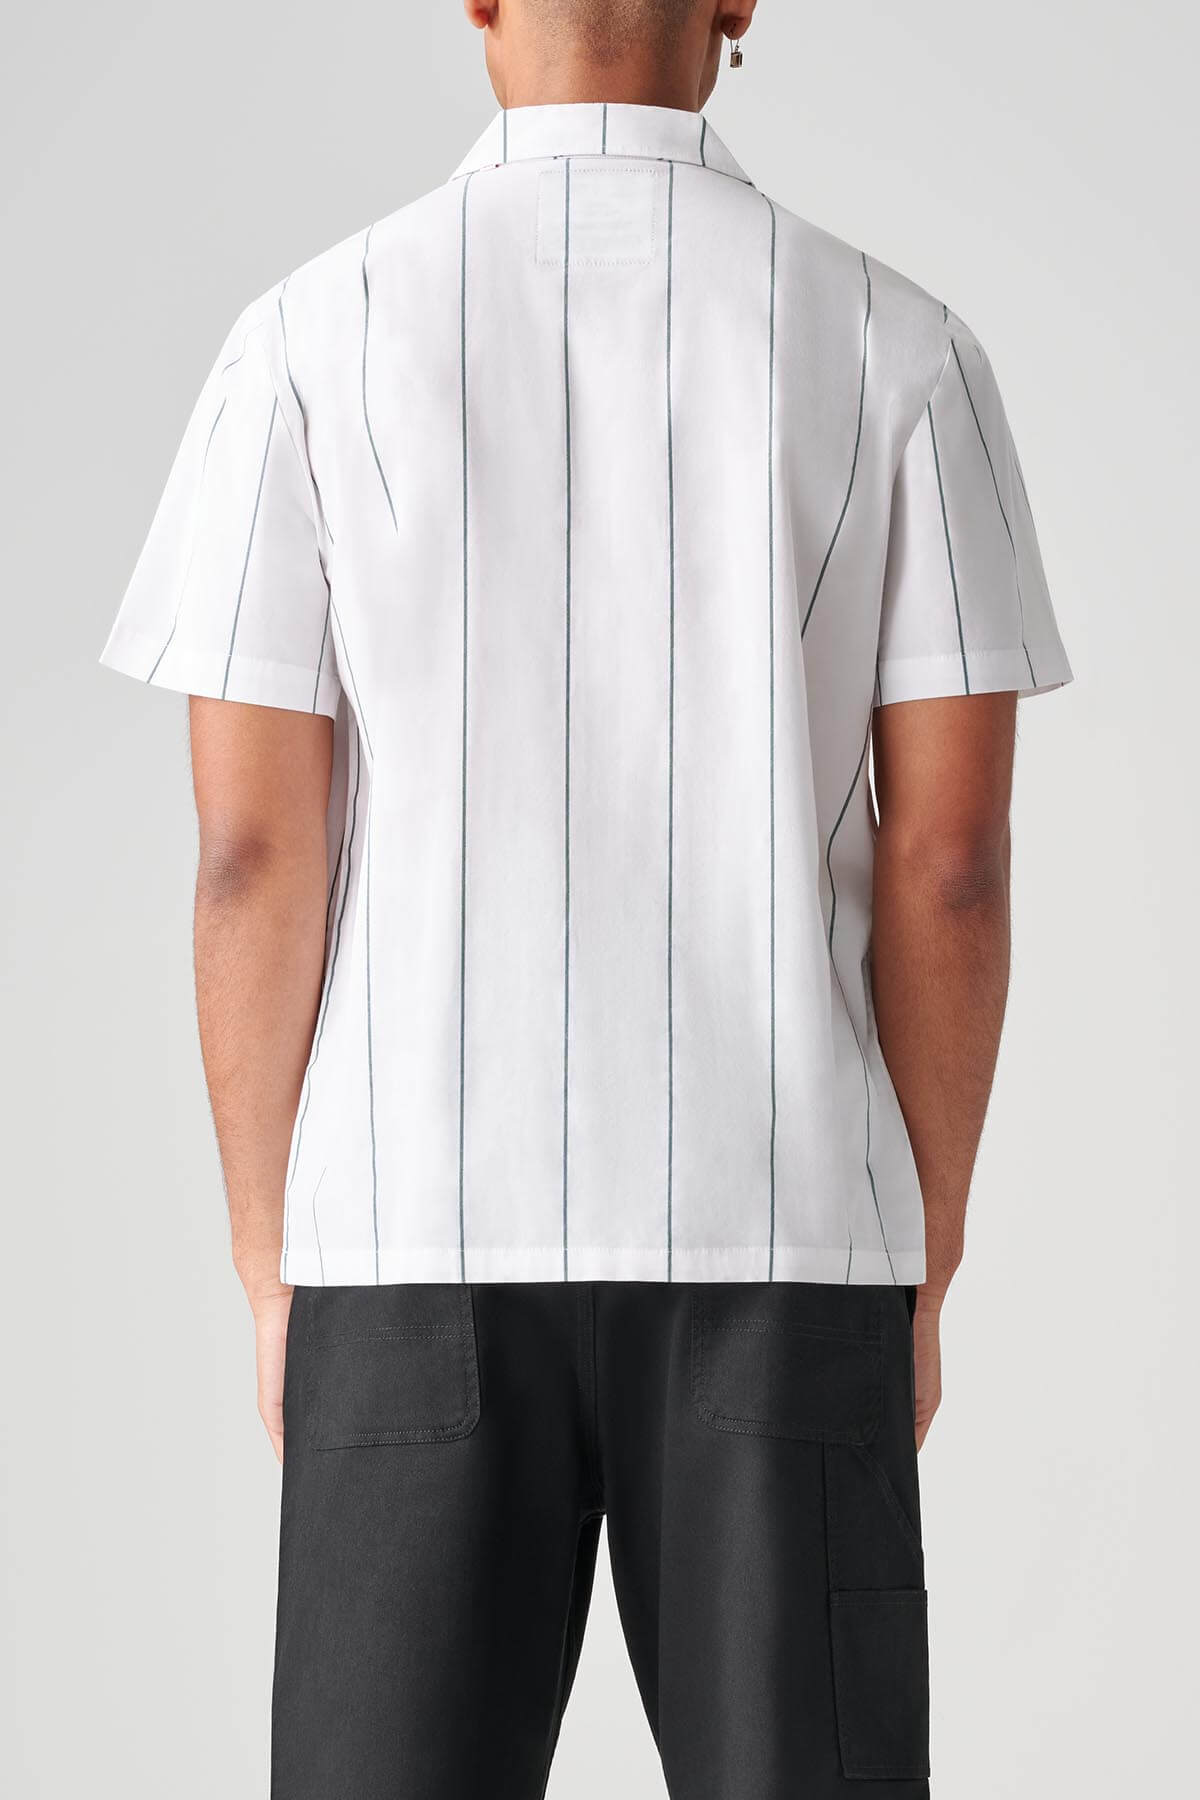 off course ss shirt white